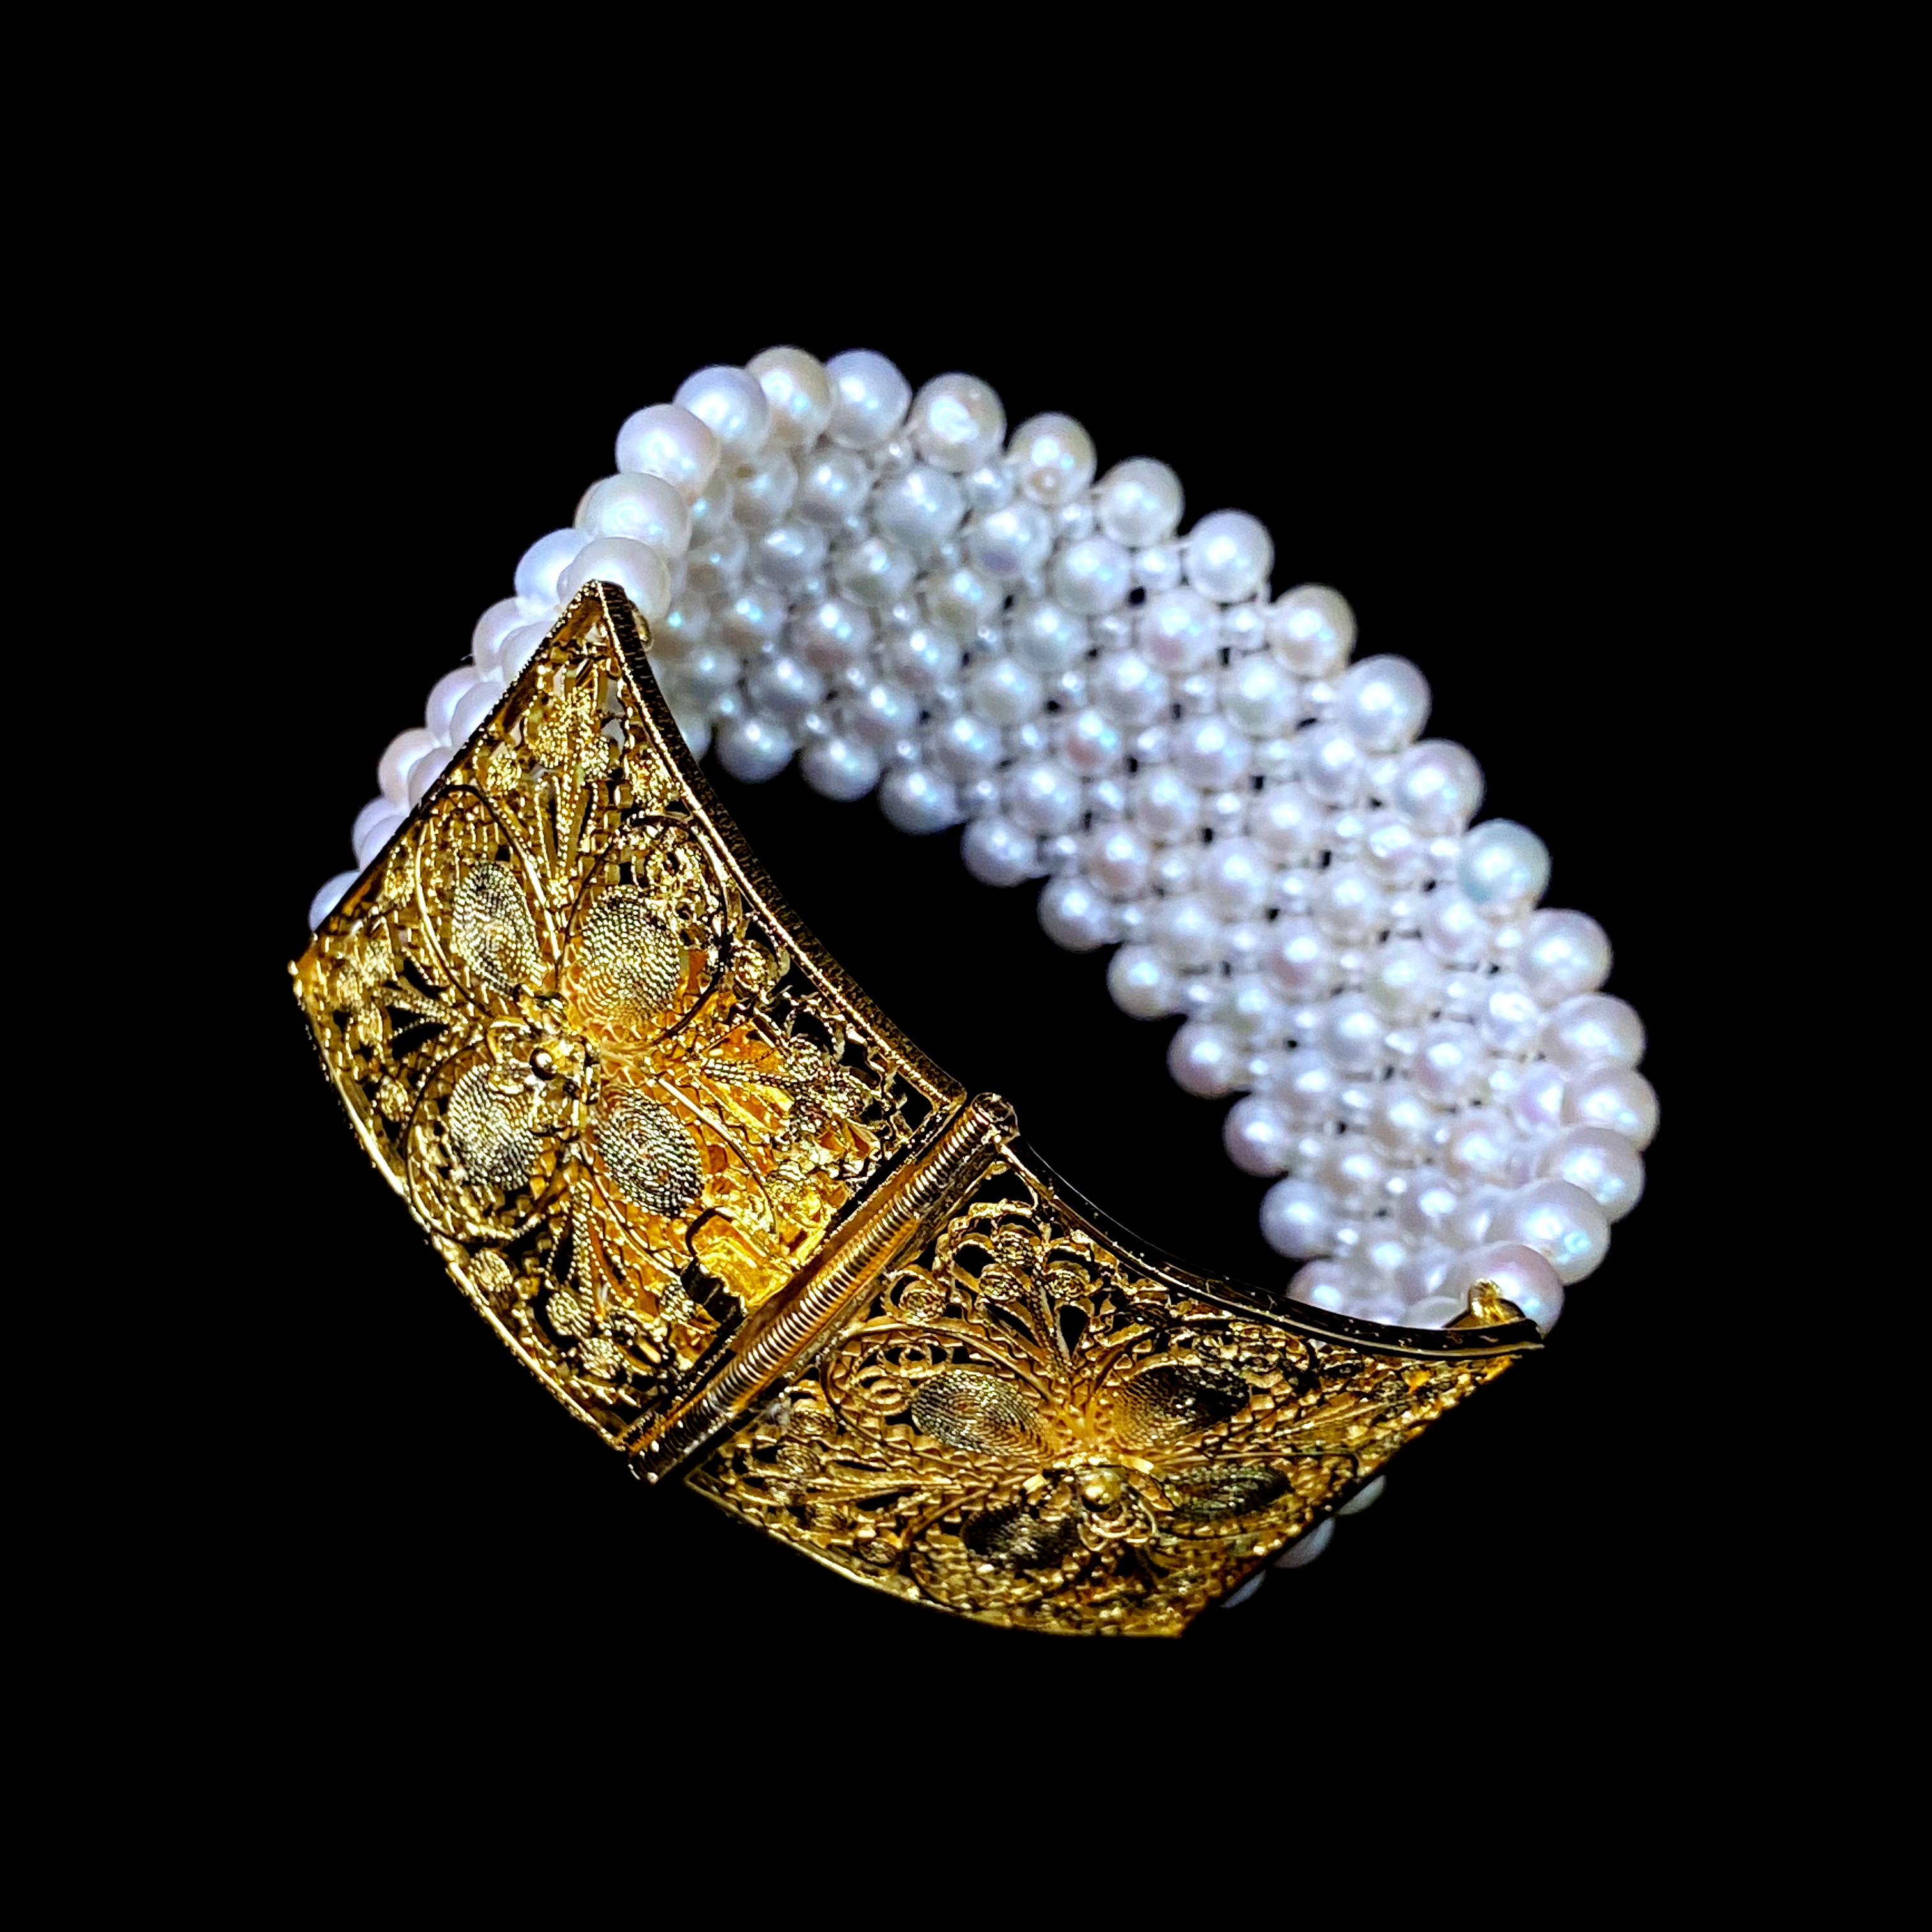 Marina J. Woven Pearl Bracelet with 18k Yellow Gold Plated Floral Clasp  3